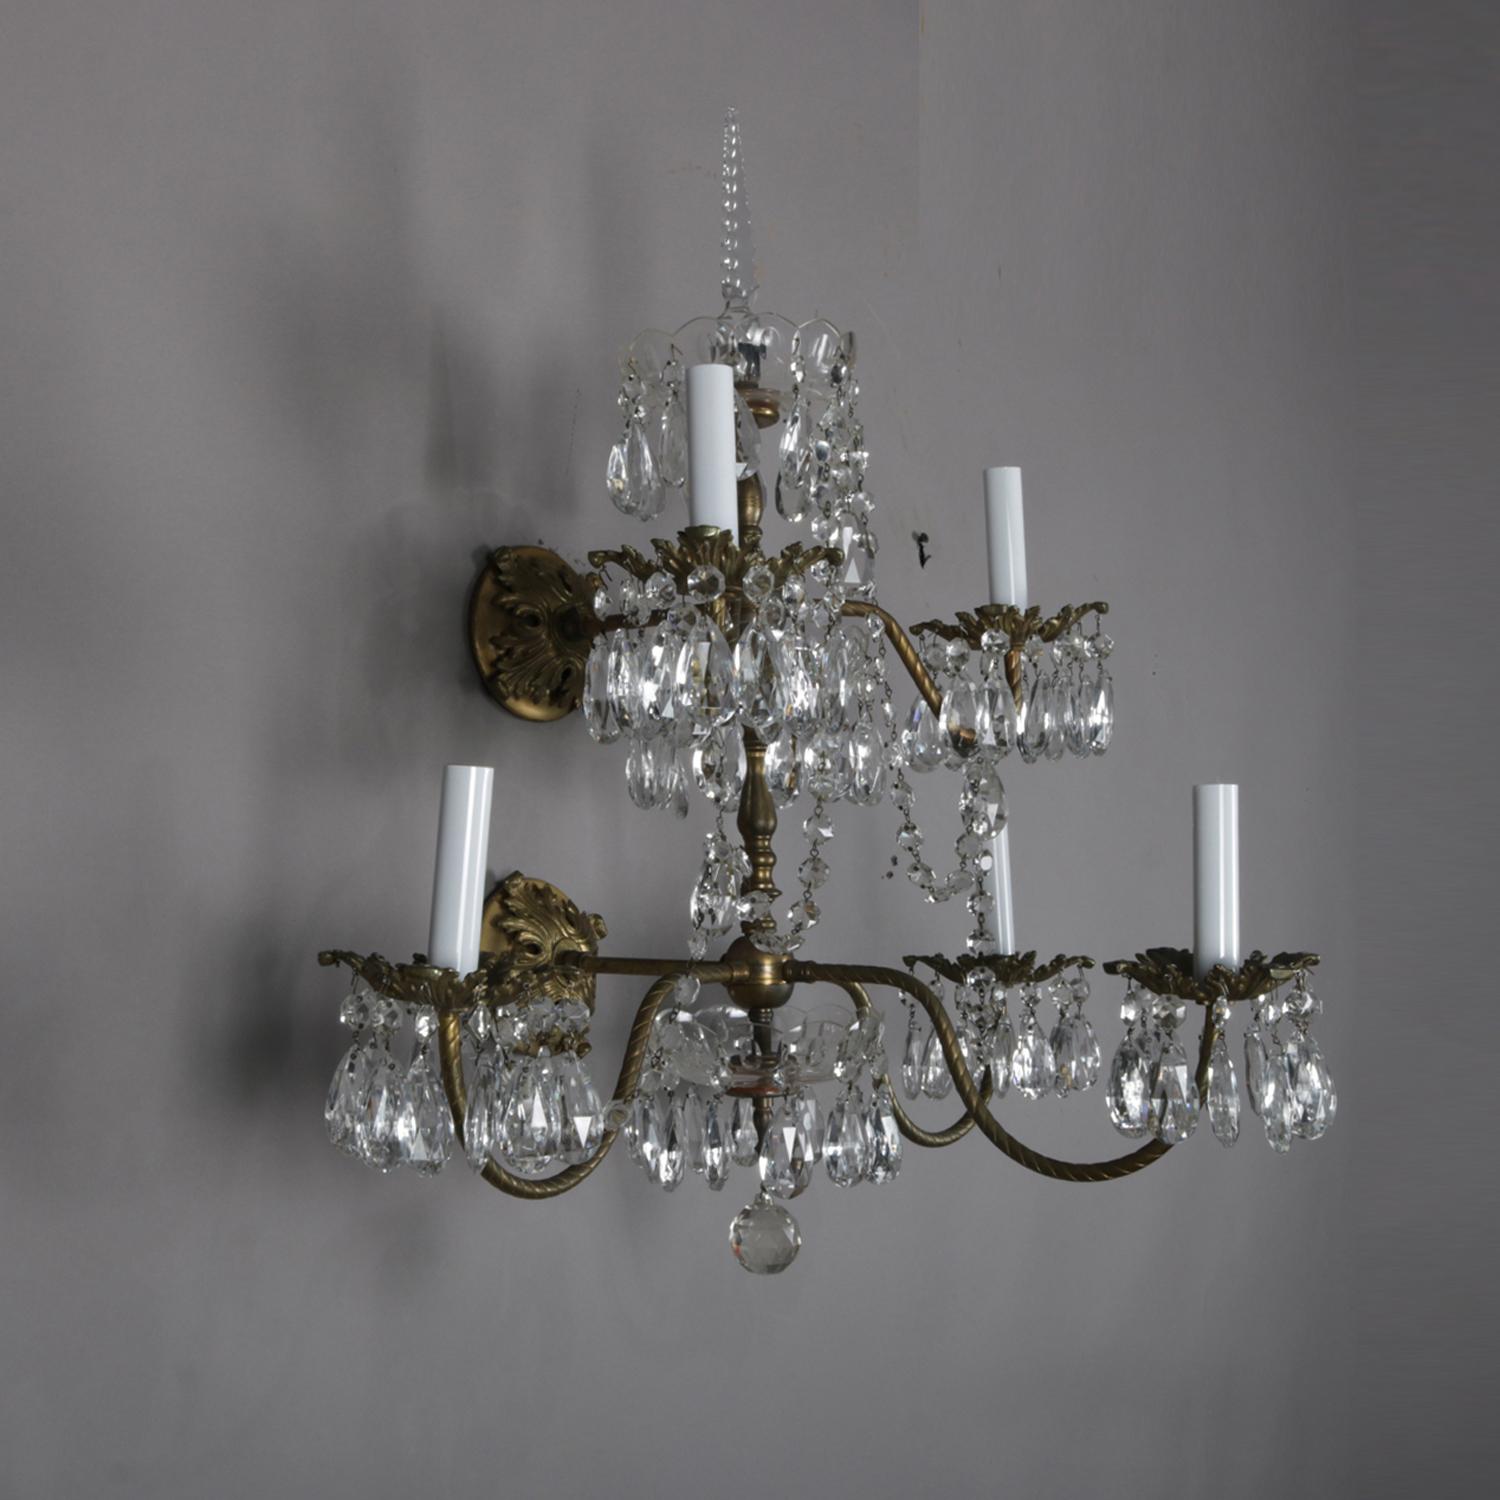 A pair of French electric wall sconces feature two tier brass branch chandelier form each with five candle lights and highlighted with hanging rock cut crystals, 20th century

Measures: 27